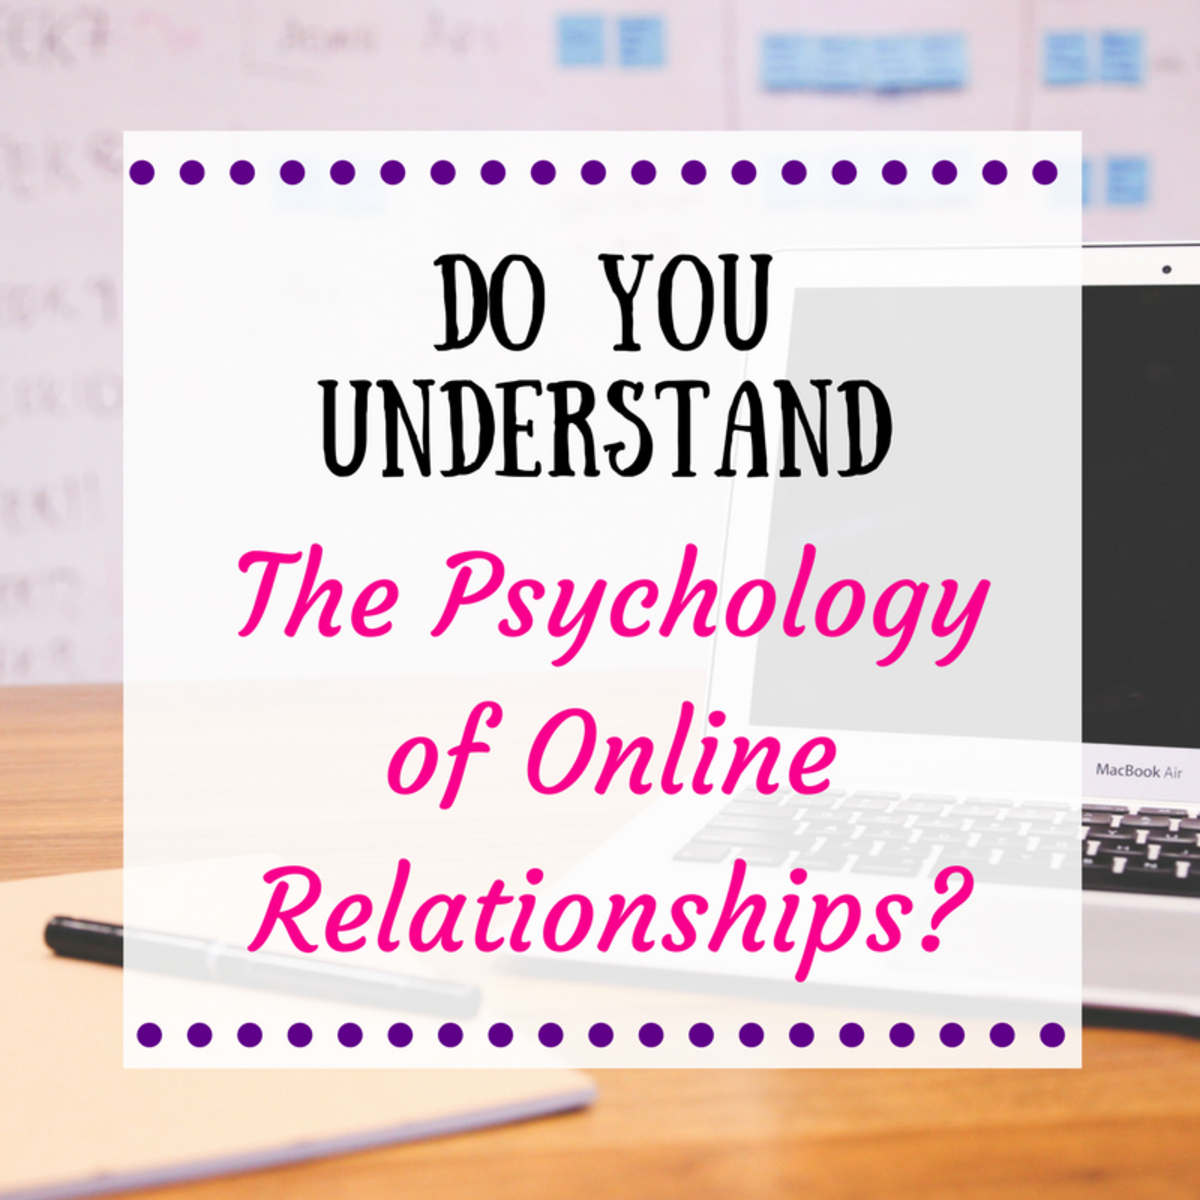 Do You Understand the Psychology of Online Relationships?